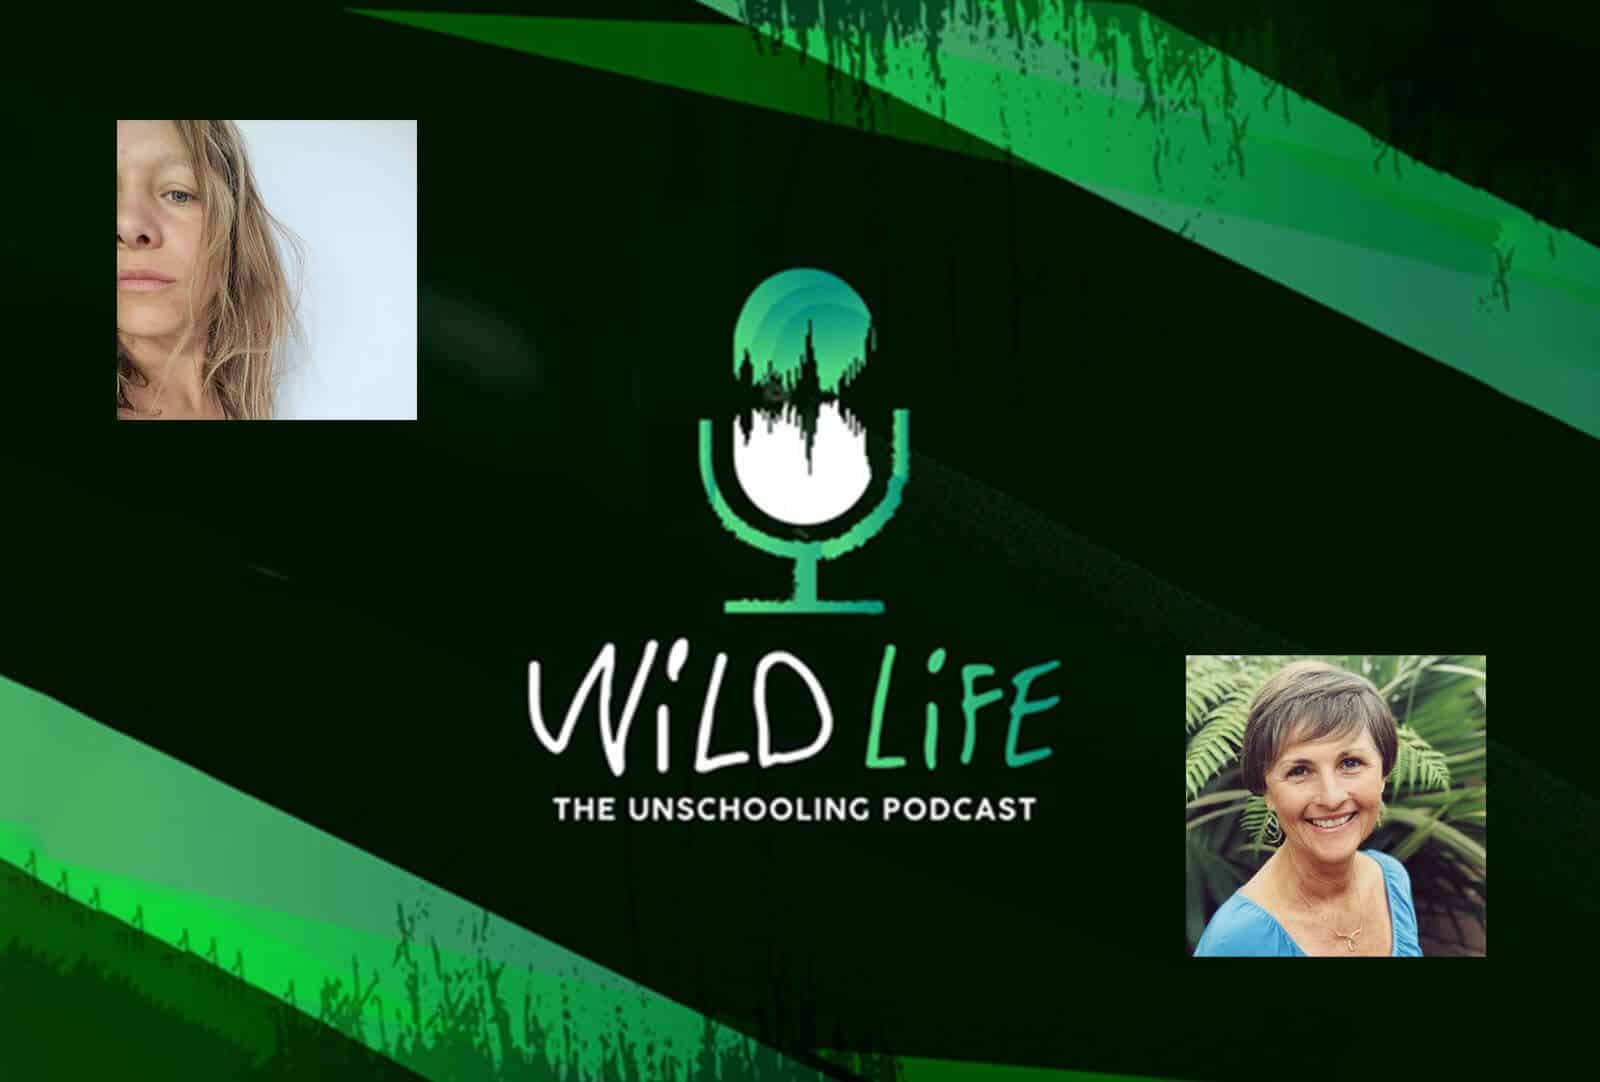 Interview on Wild Life – The Unschooling Podcast (Alexandra Kons)